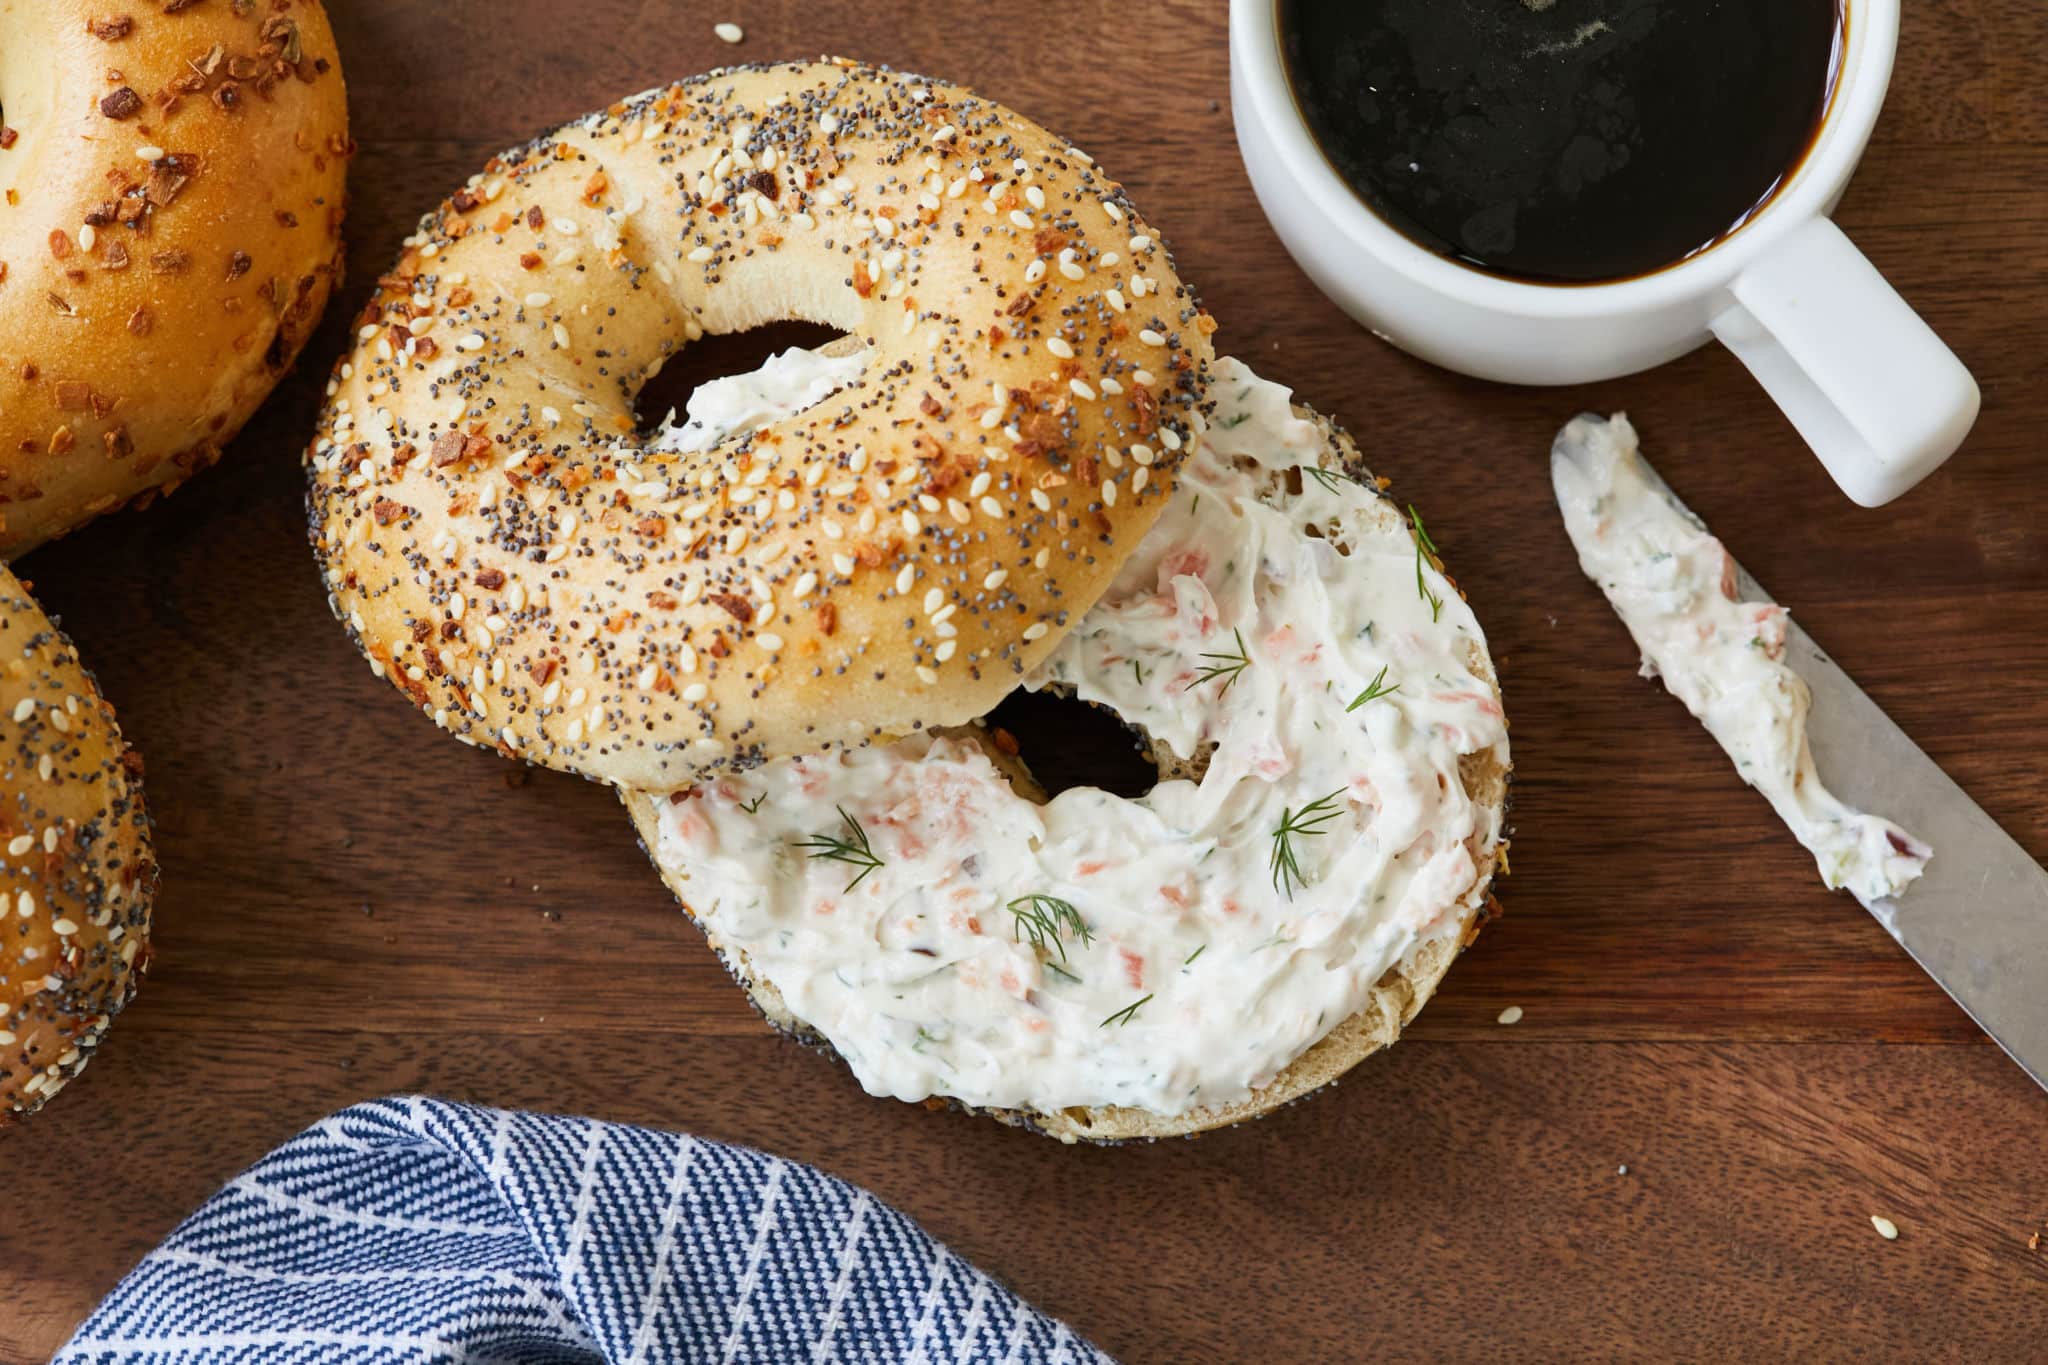 Homemade Smoked Salmon Cream Cheese is smeared on an everything bagel next to a black cup of coffee